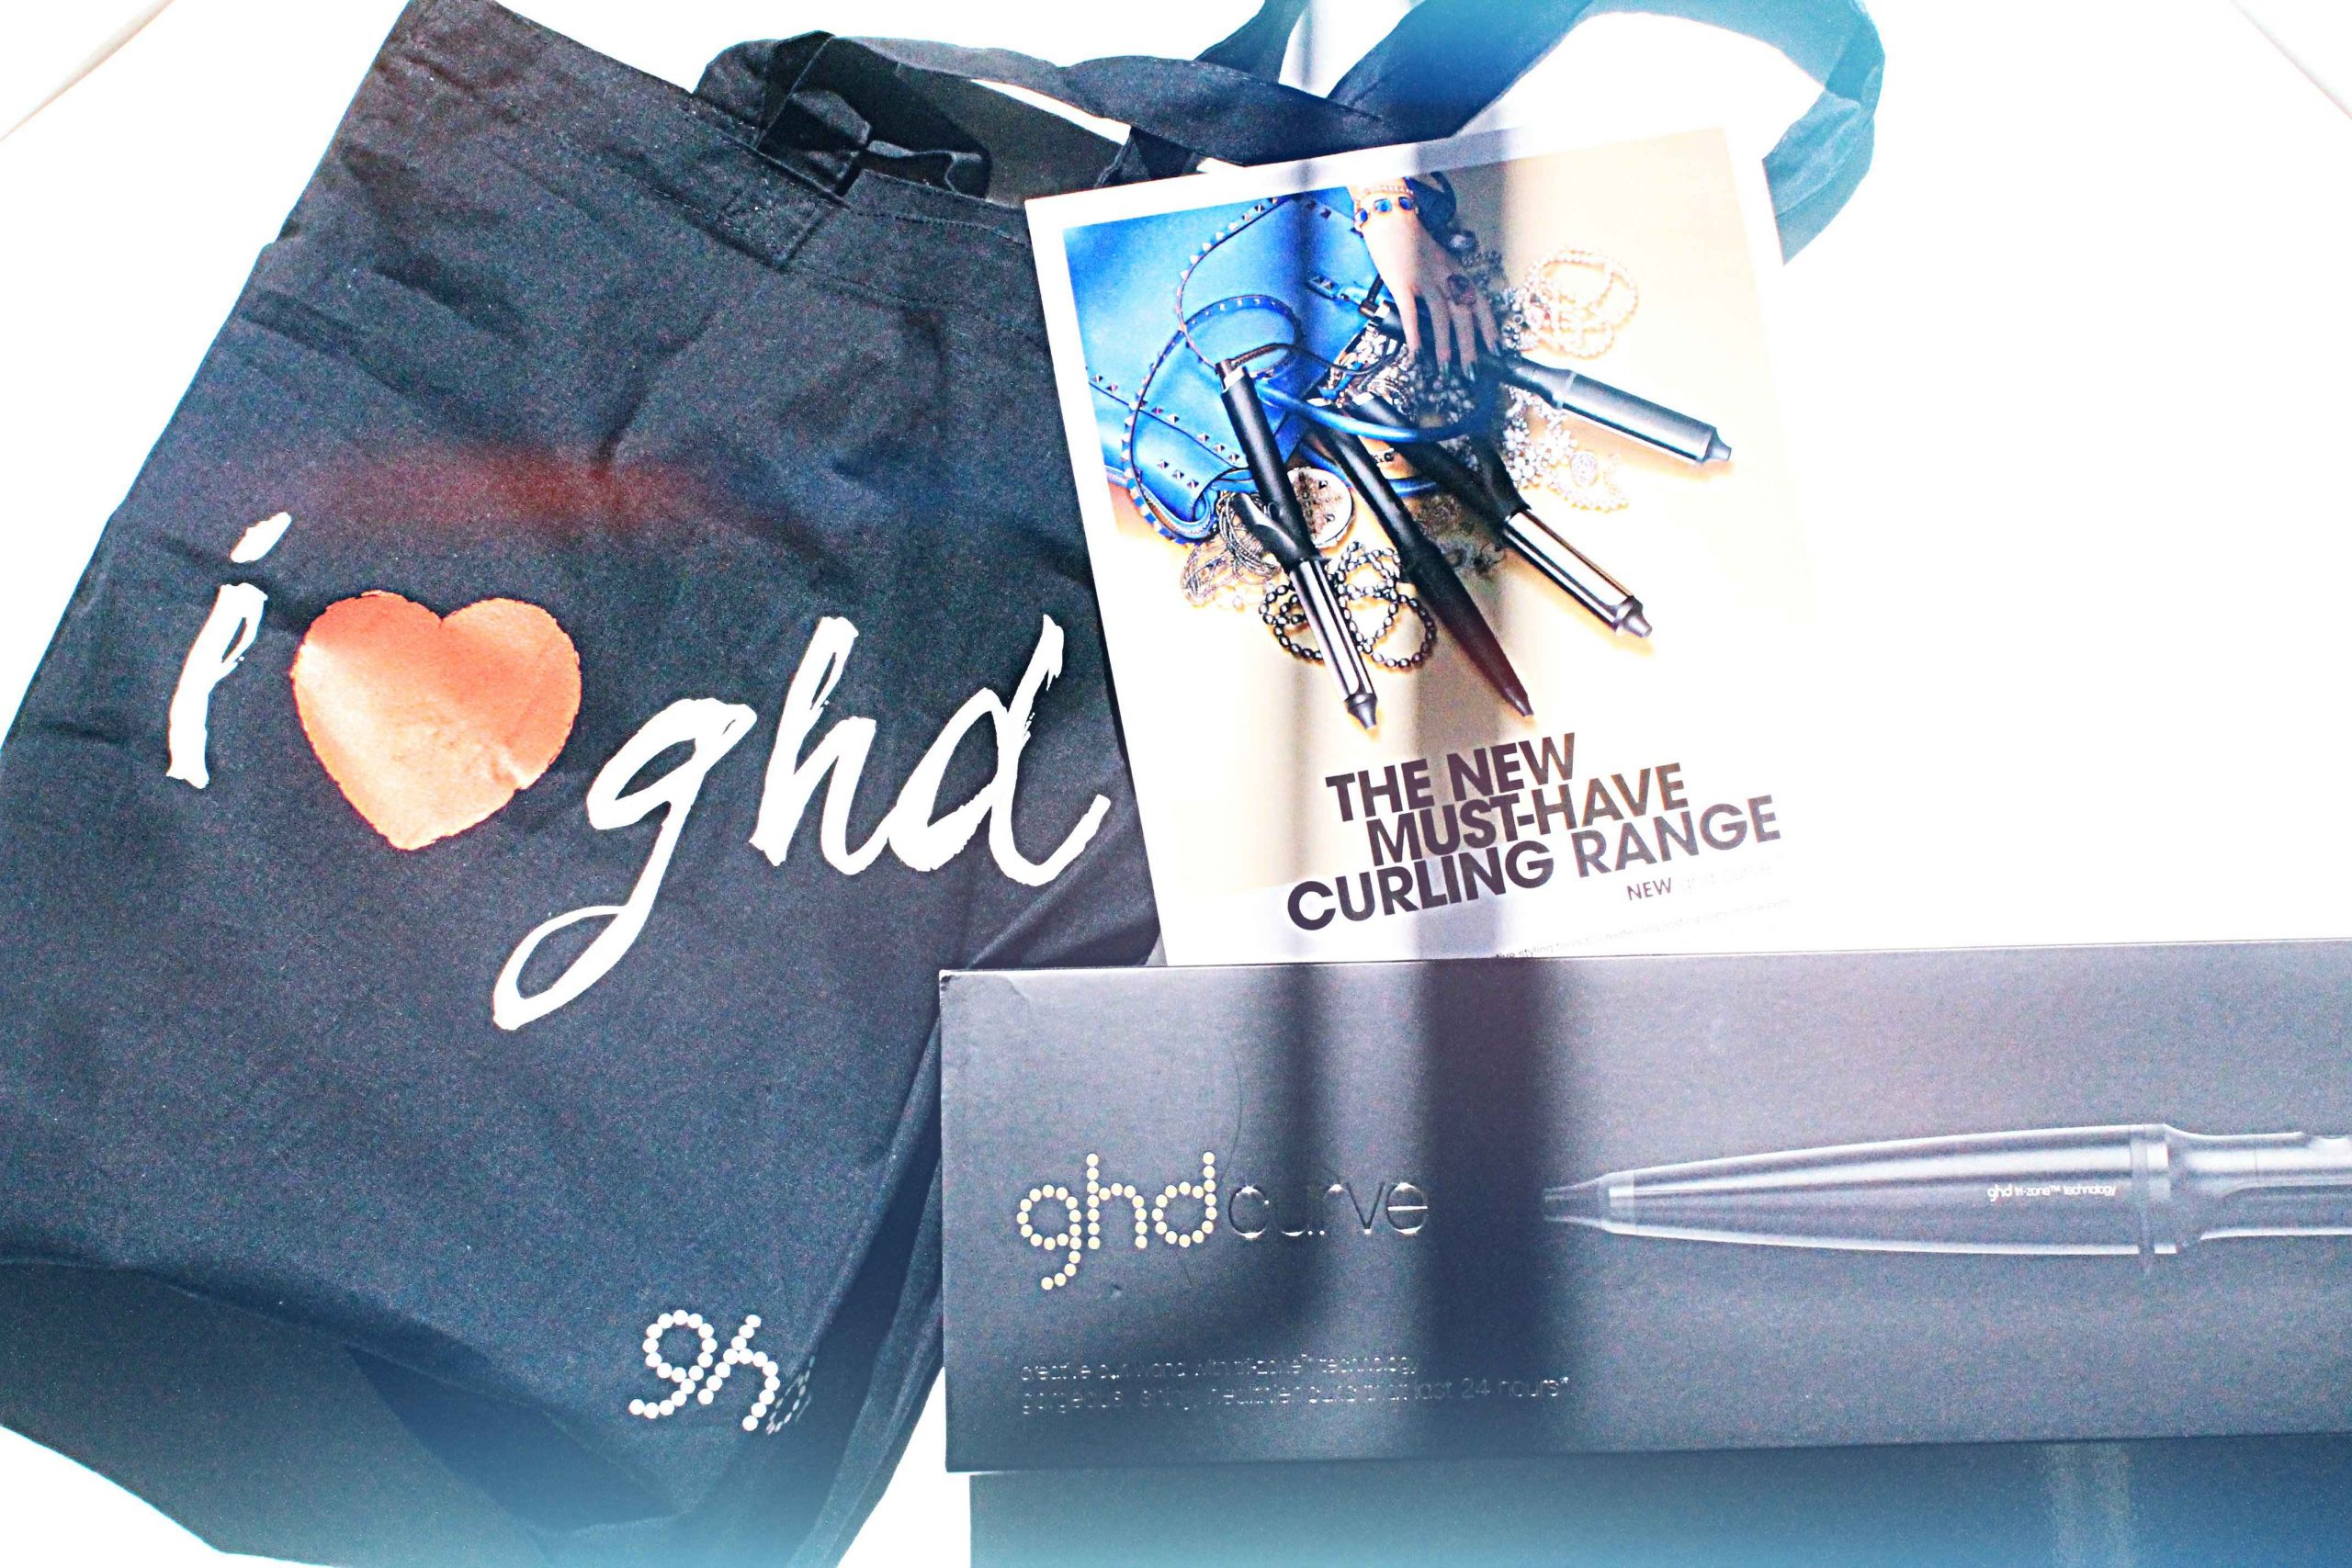 Best Bits at the ghd curve Launch